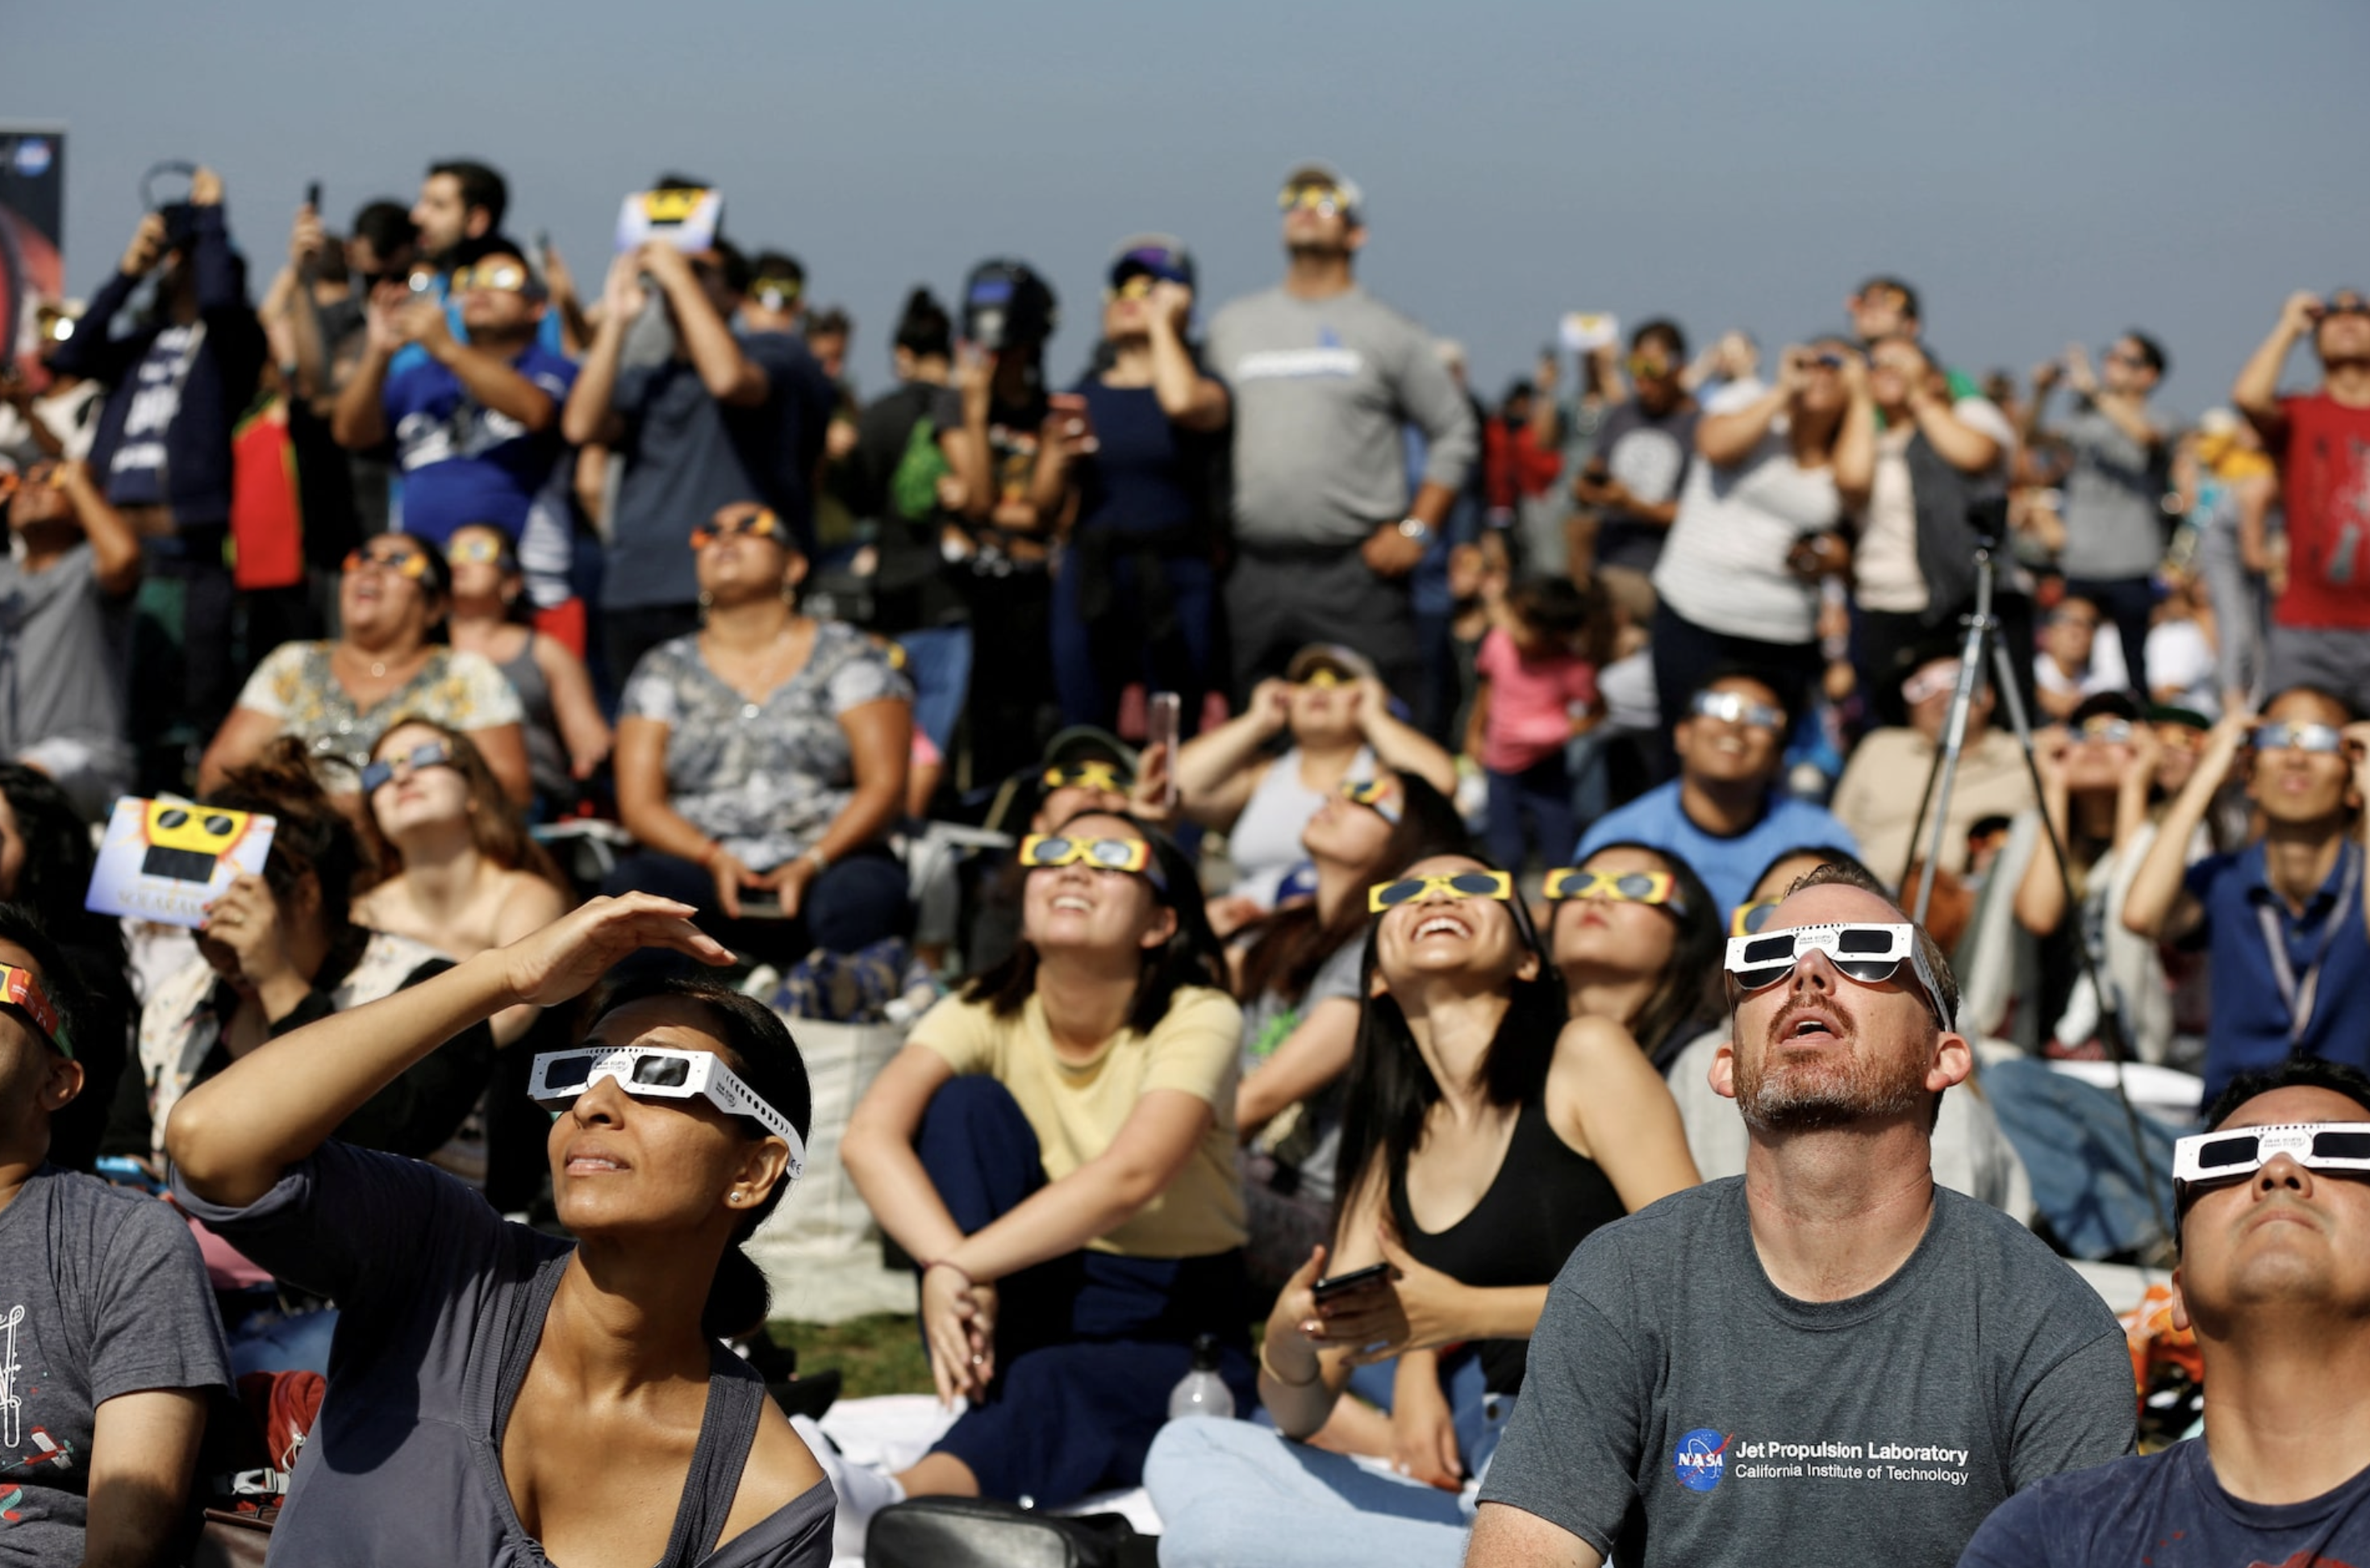 People watch the solar eclipse on the lawn of Griffith Observatory in Los Angeles, California, U.S., August 21, 2017. Photo: Reuters